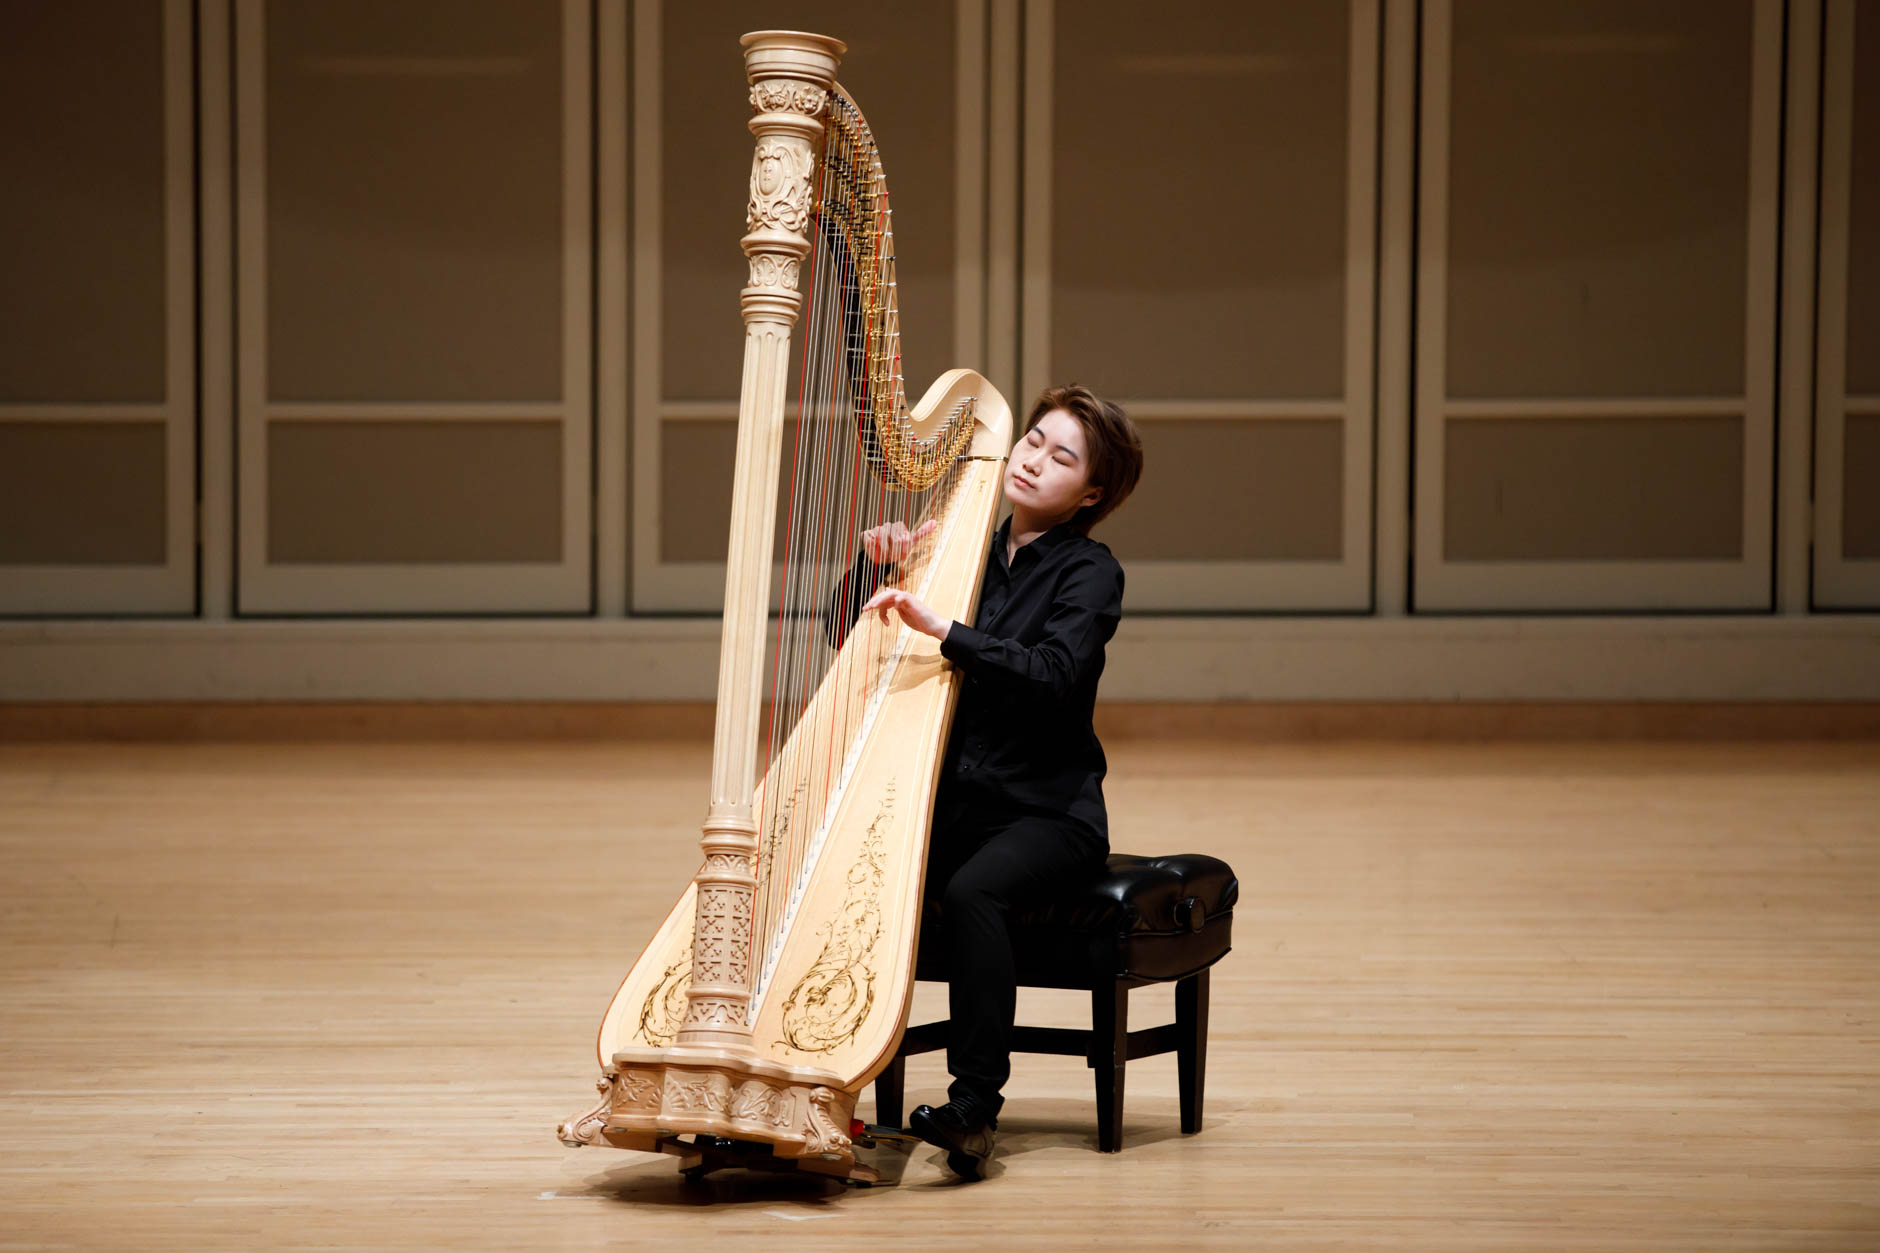 Xinyue Zhang performs during the Stars of Tomorrow Concert at the 11th USA International Harp Competition at Indiana University in Bloomington, Indiana on Thursday, July 11, 2019. (Photo by James Brosher)